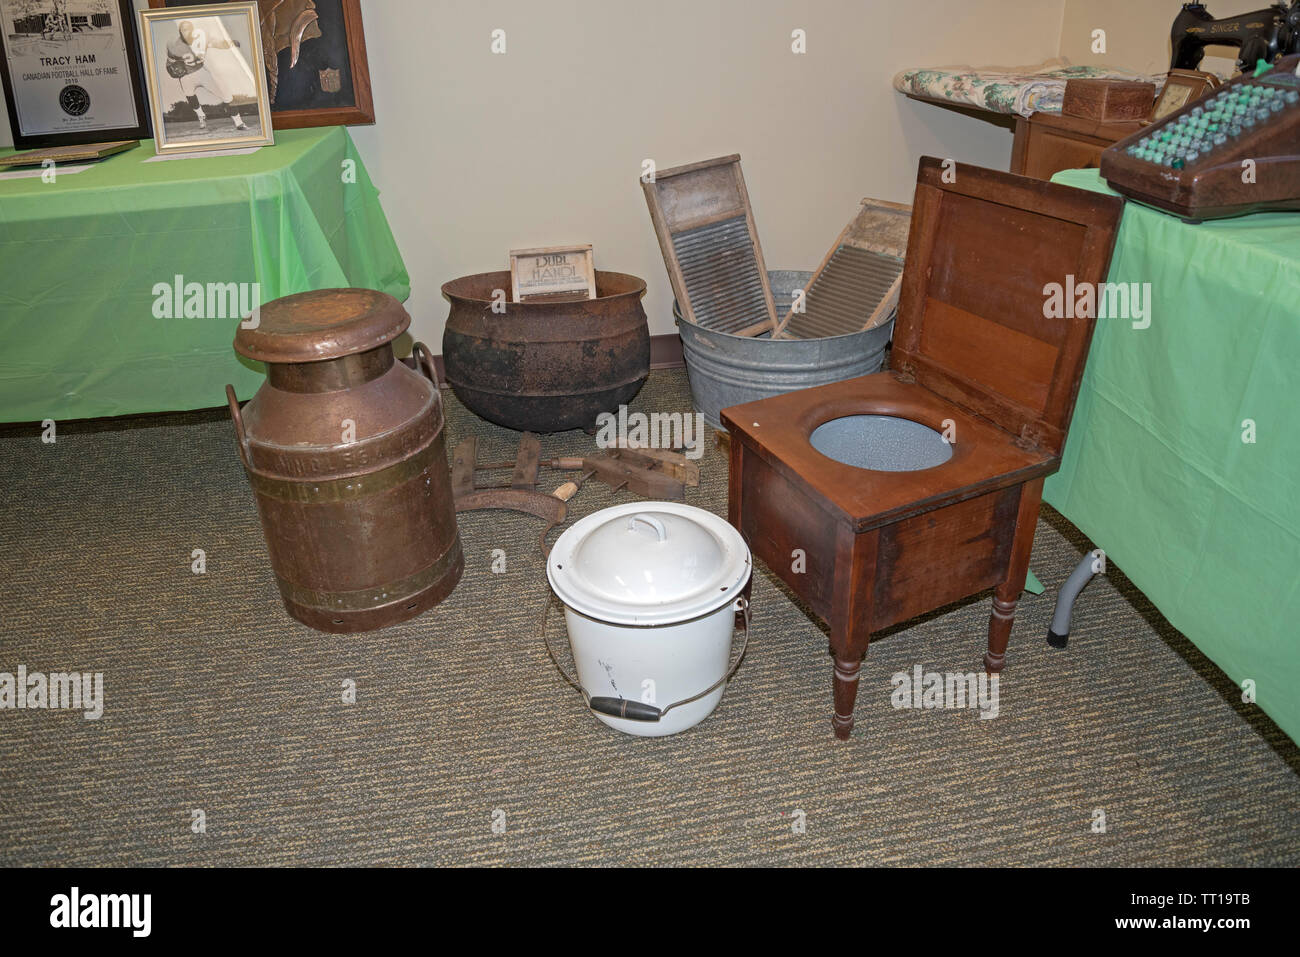 Pioneer Days small town annual celebration in North Central Florida. Museum display of old and antique items, High Springs, FL. Stock Photo